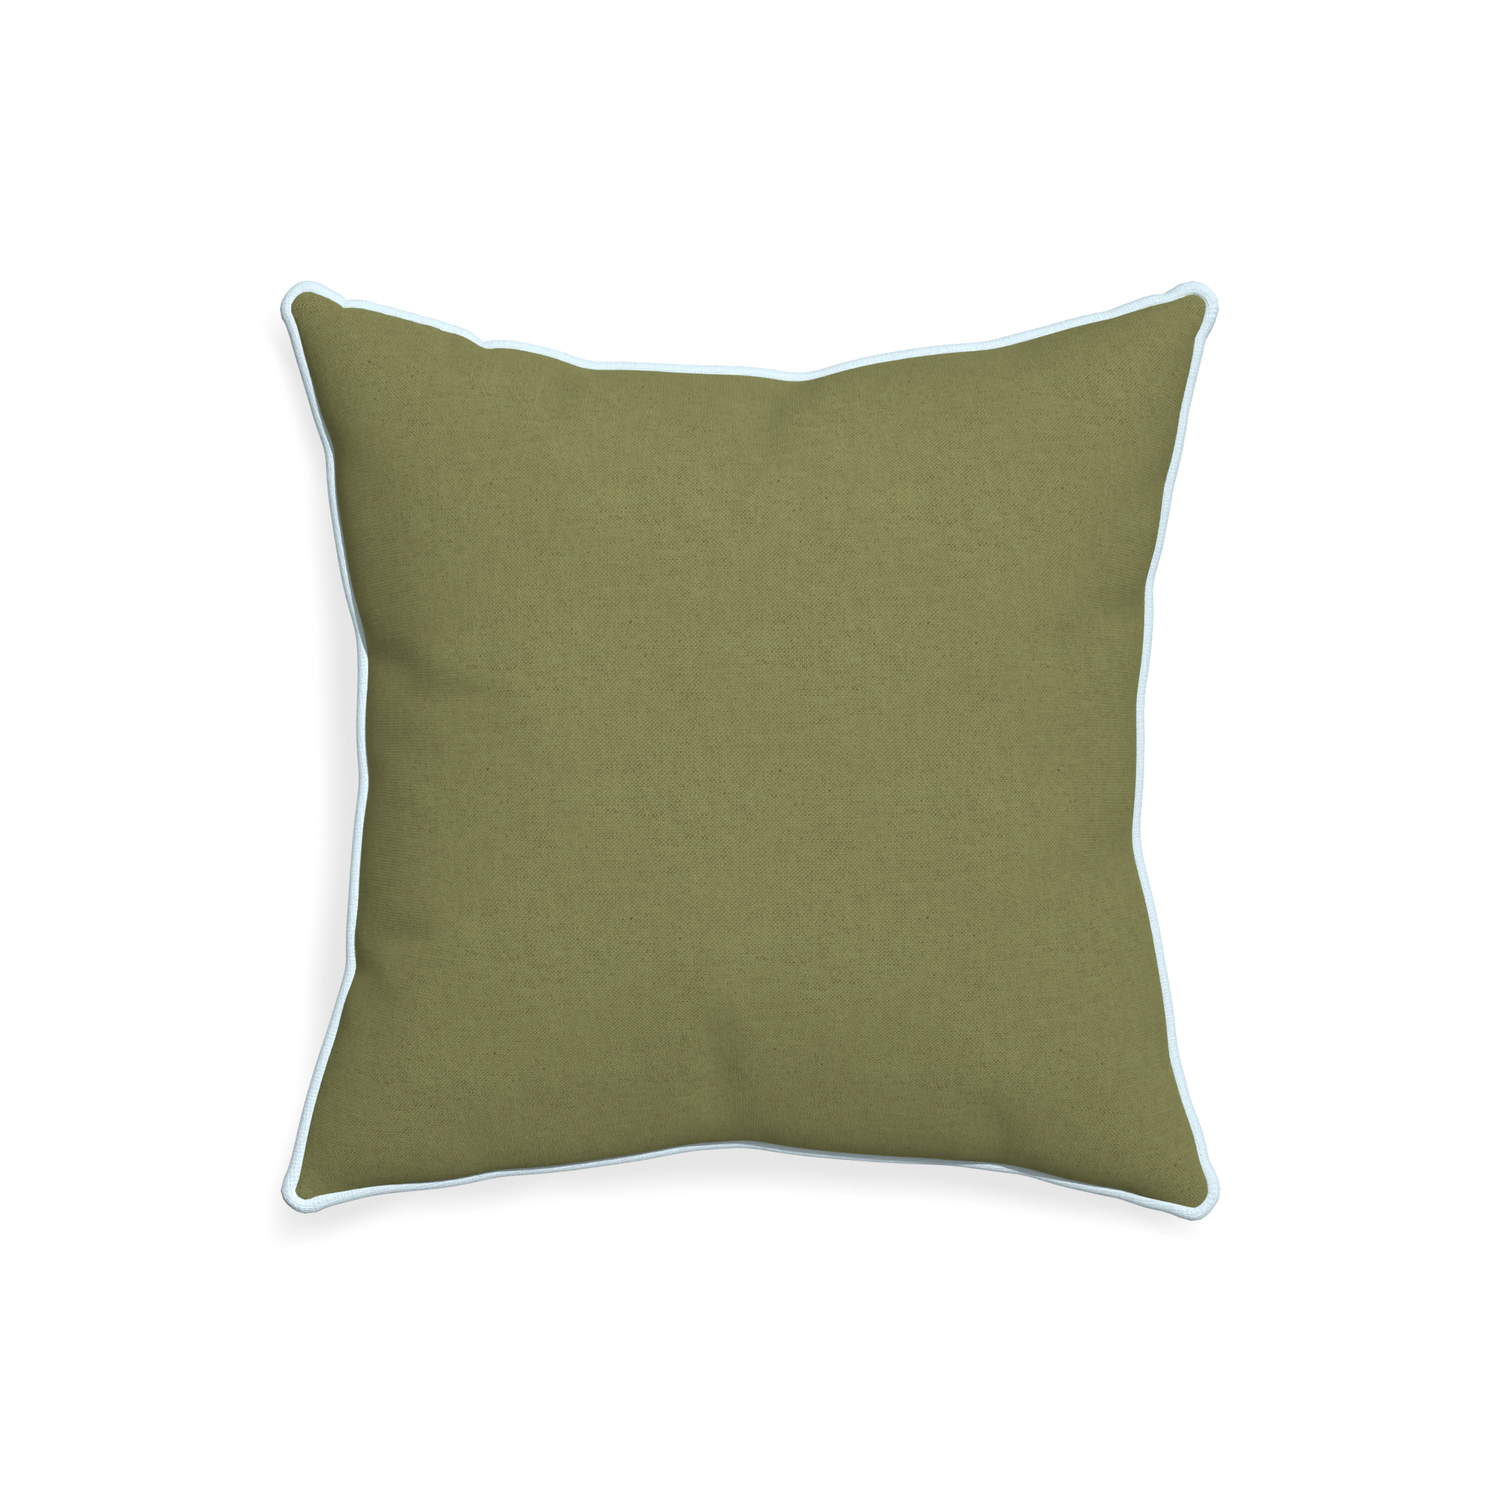 20-square moss custom moss greenpillow with powder piping on white background